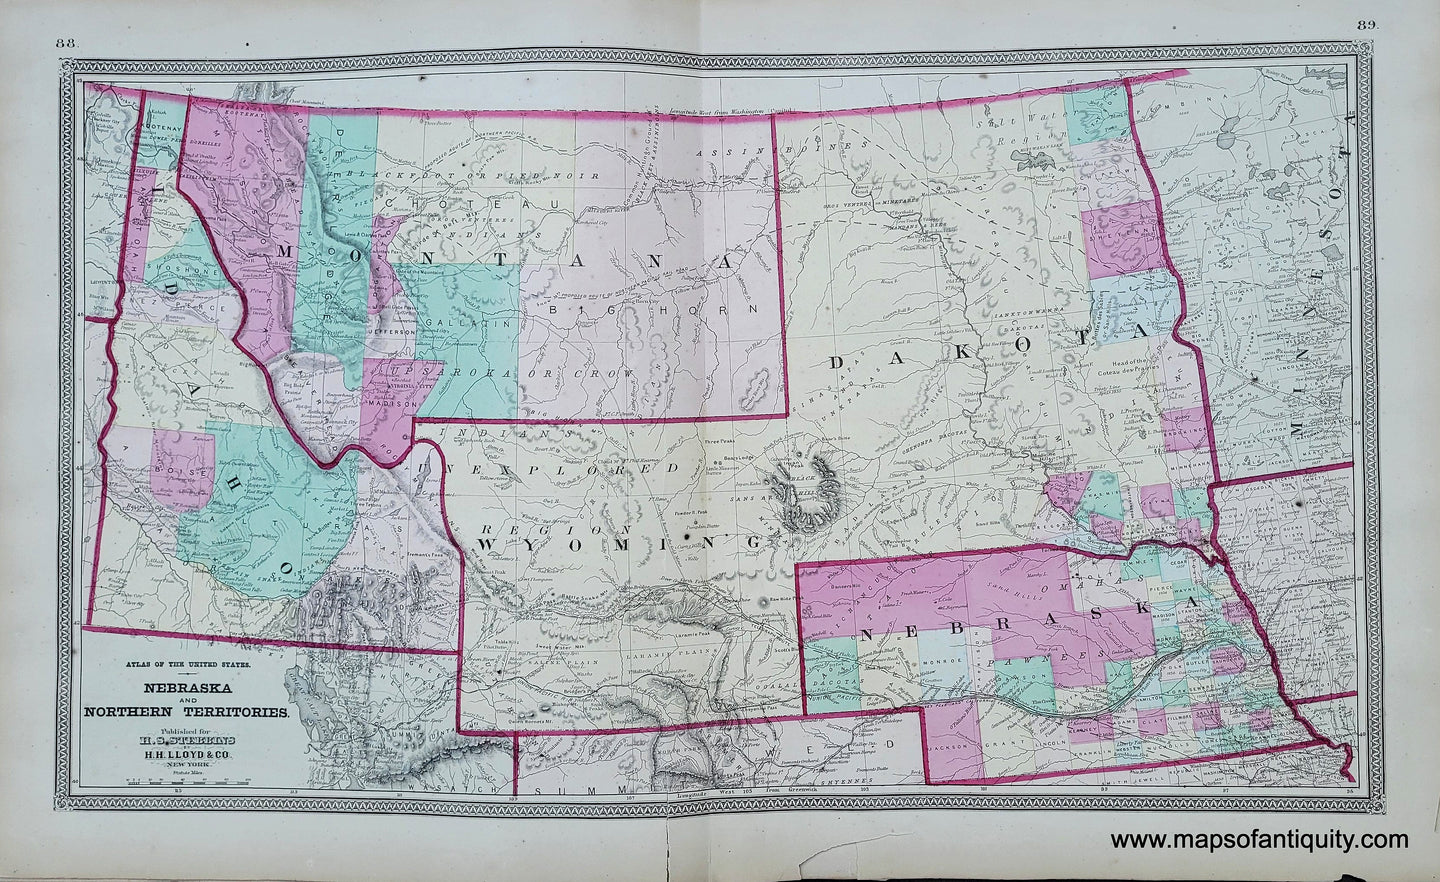 Genuine-Antique-Hand-colored-Map-Nebraska-and-Northern-Territories-1868-Stebbins-Lloyd-Maps-Of-Antiquity